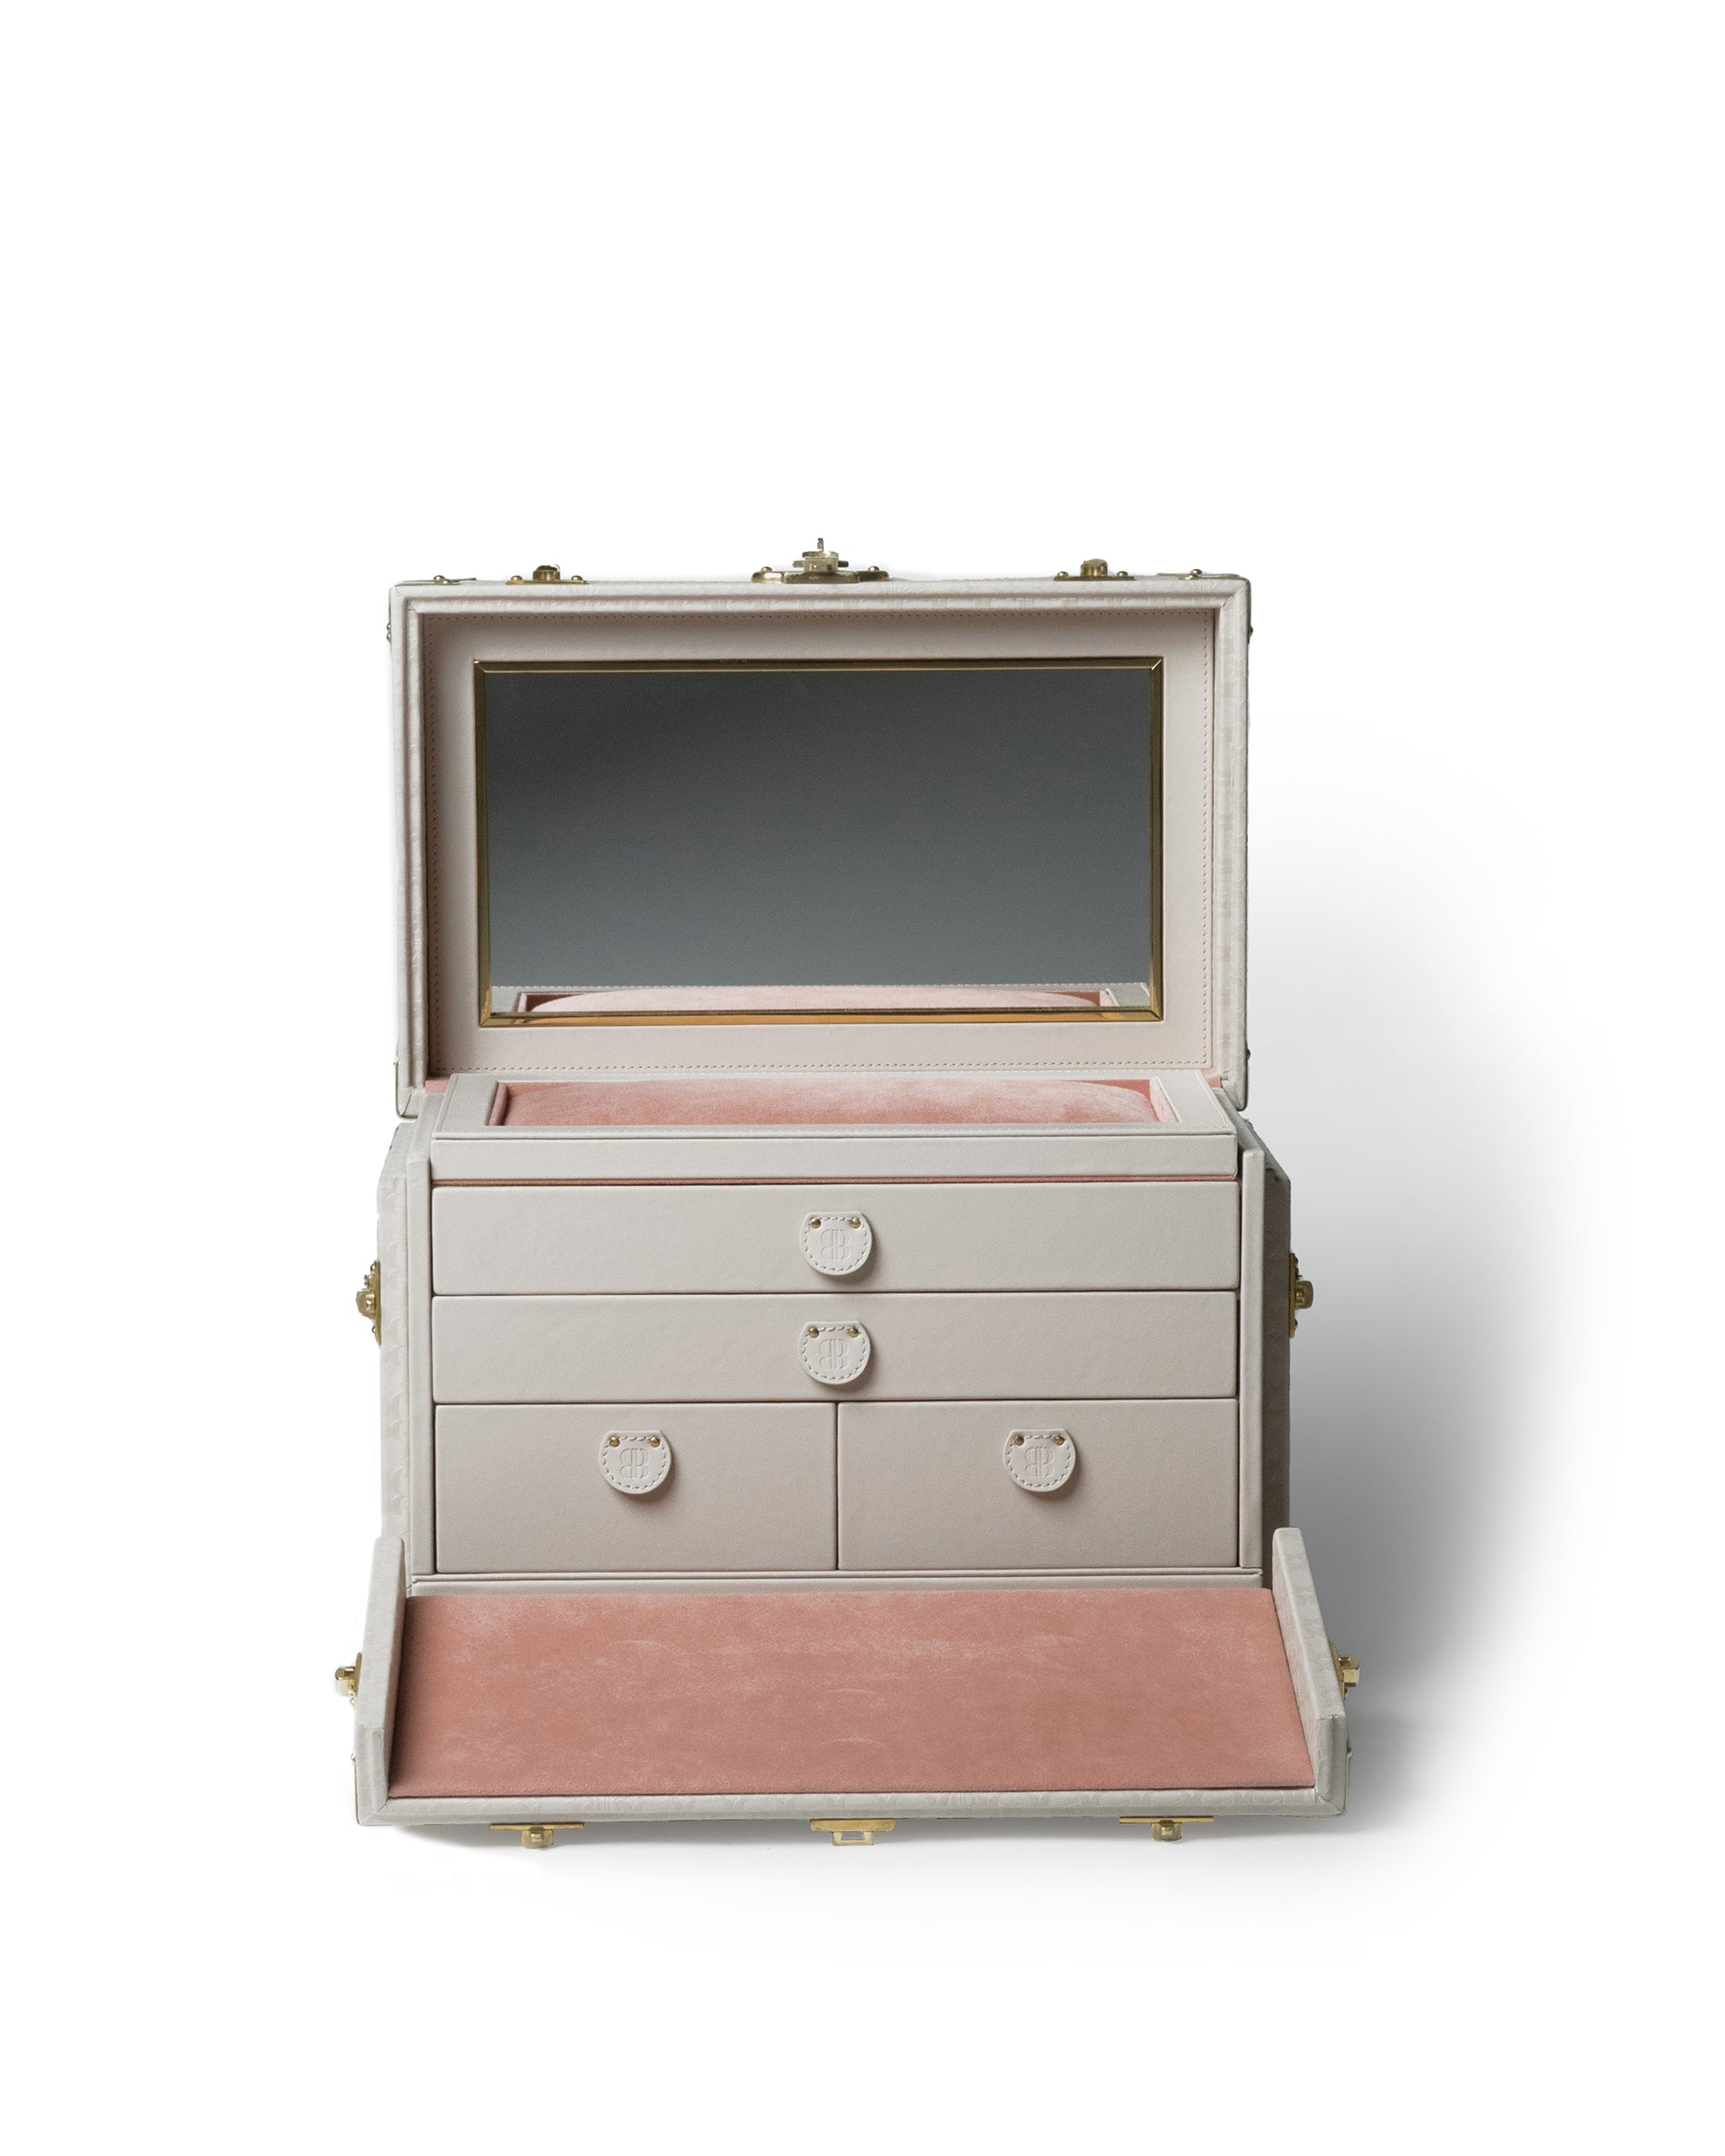 Jewelry Holder Bernardini Milano made of pink leather and alcantara - with different trays 